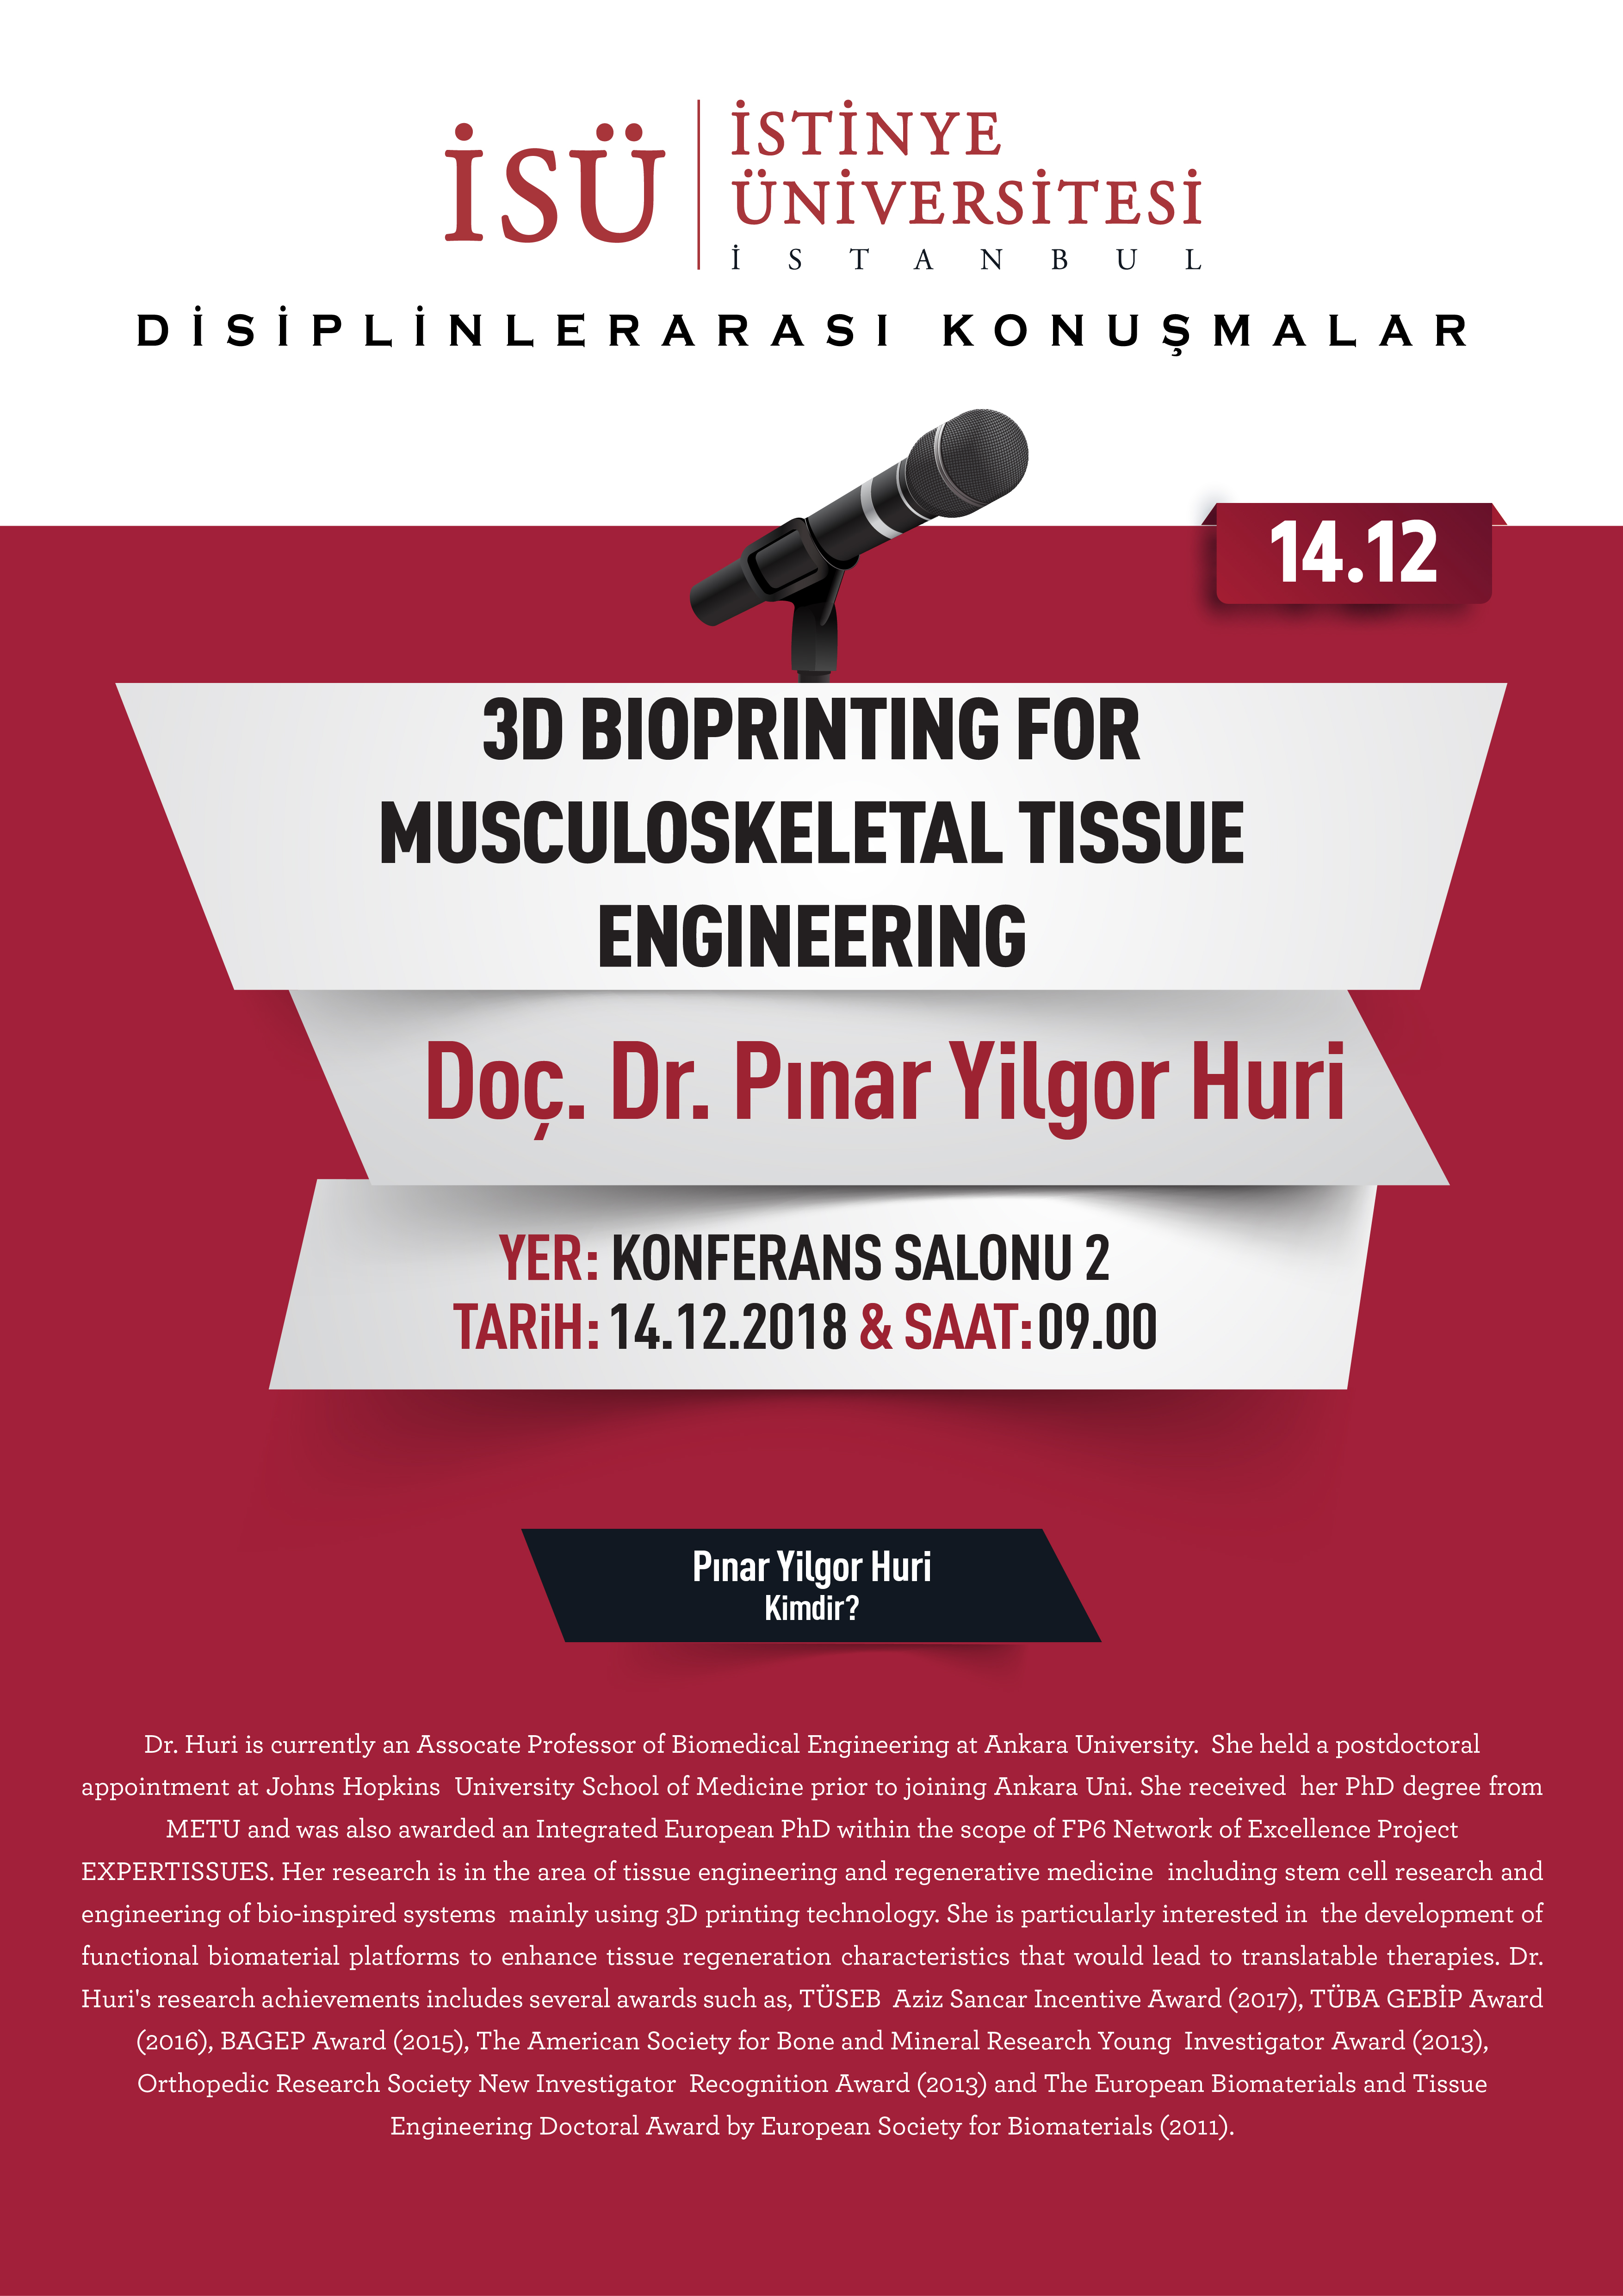 3D Bioprinting For Musculoskeletal Tissue Engineering